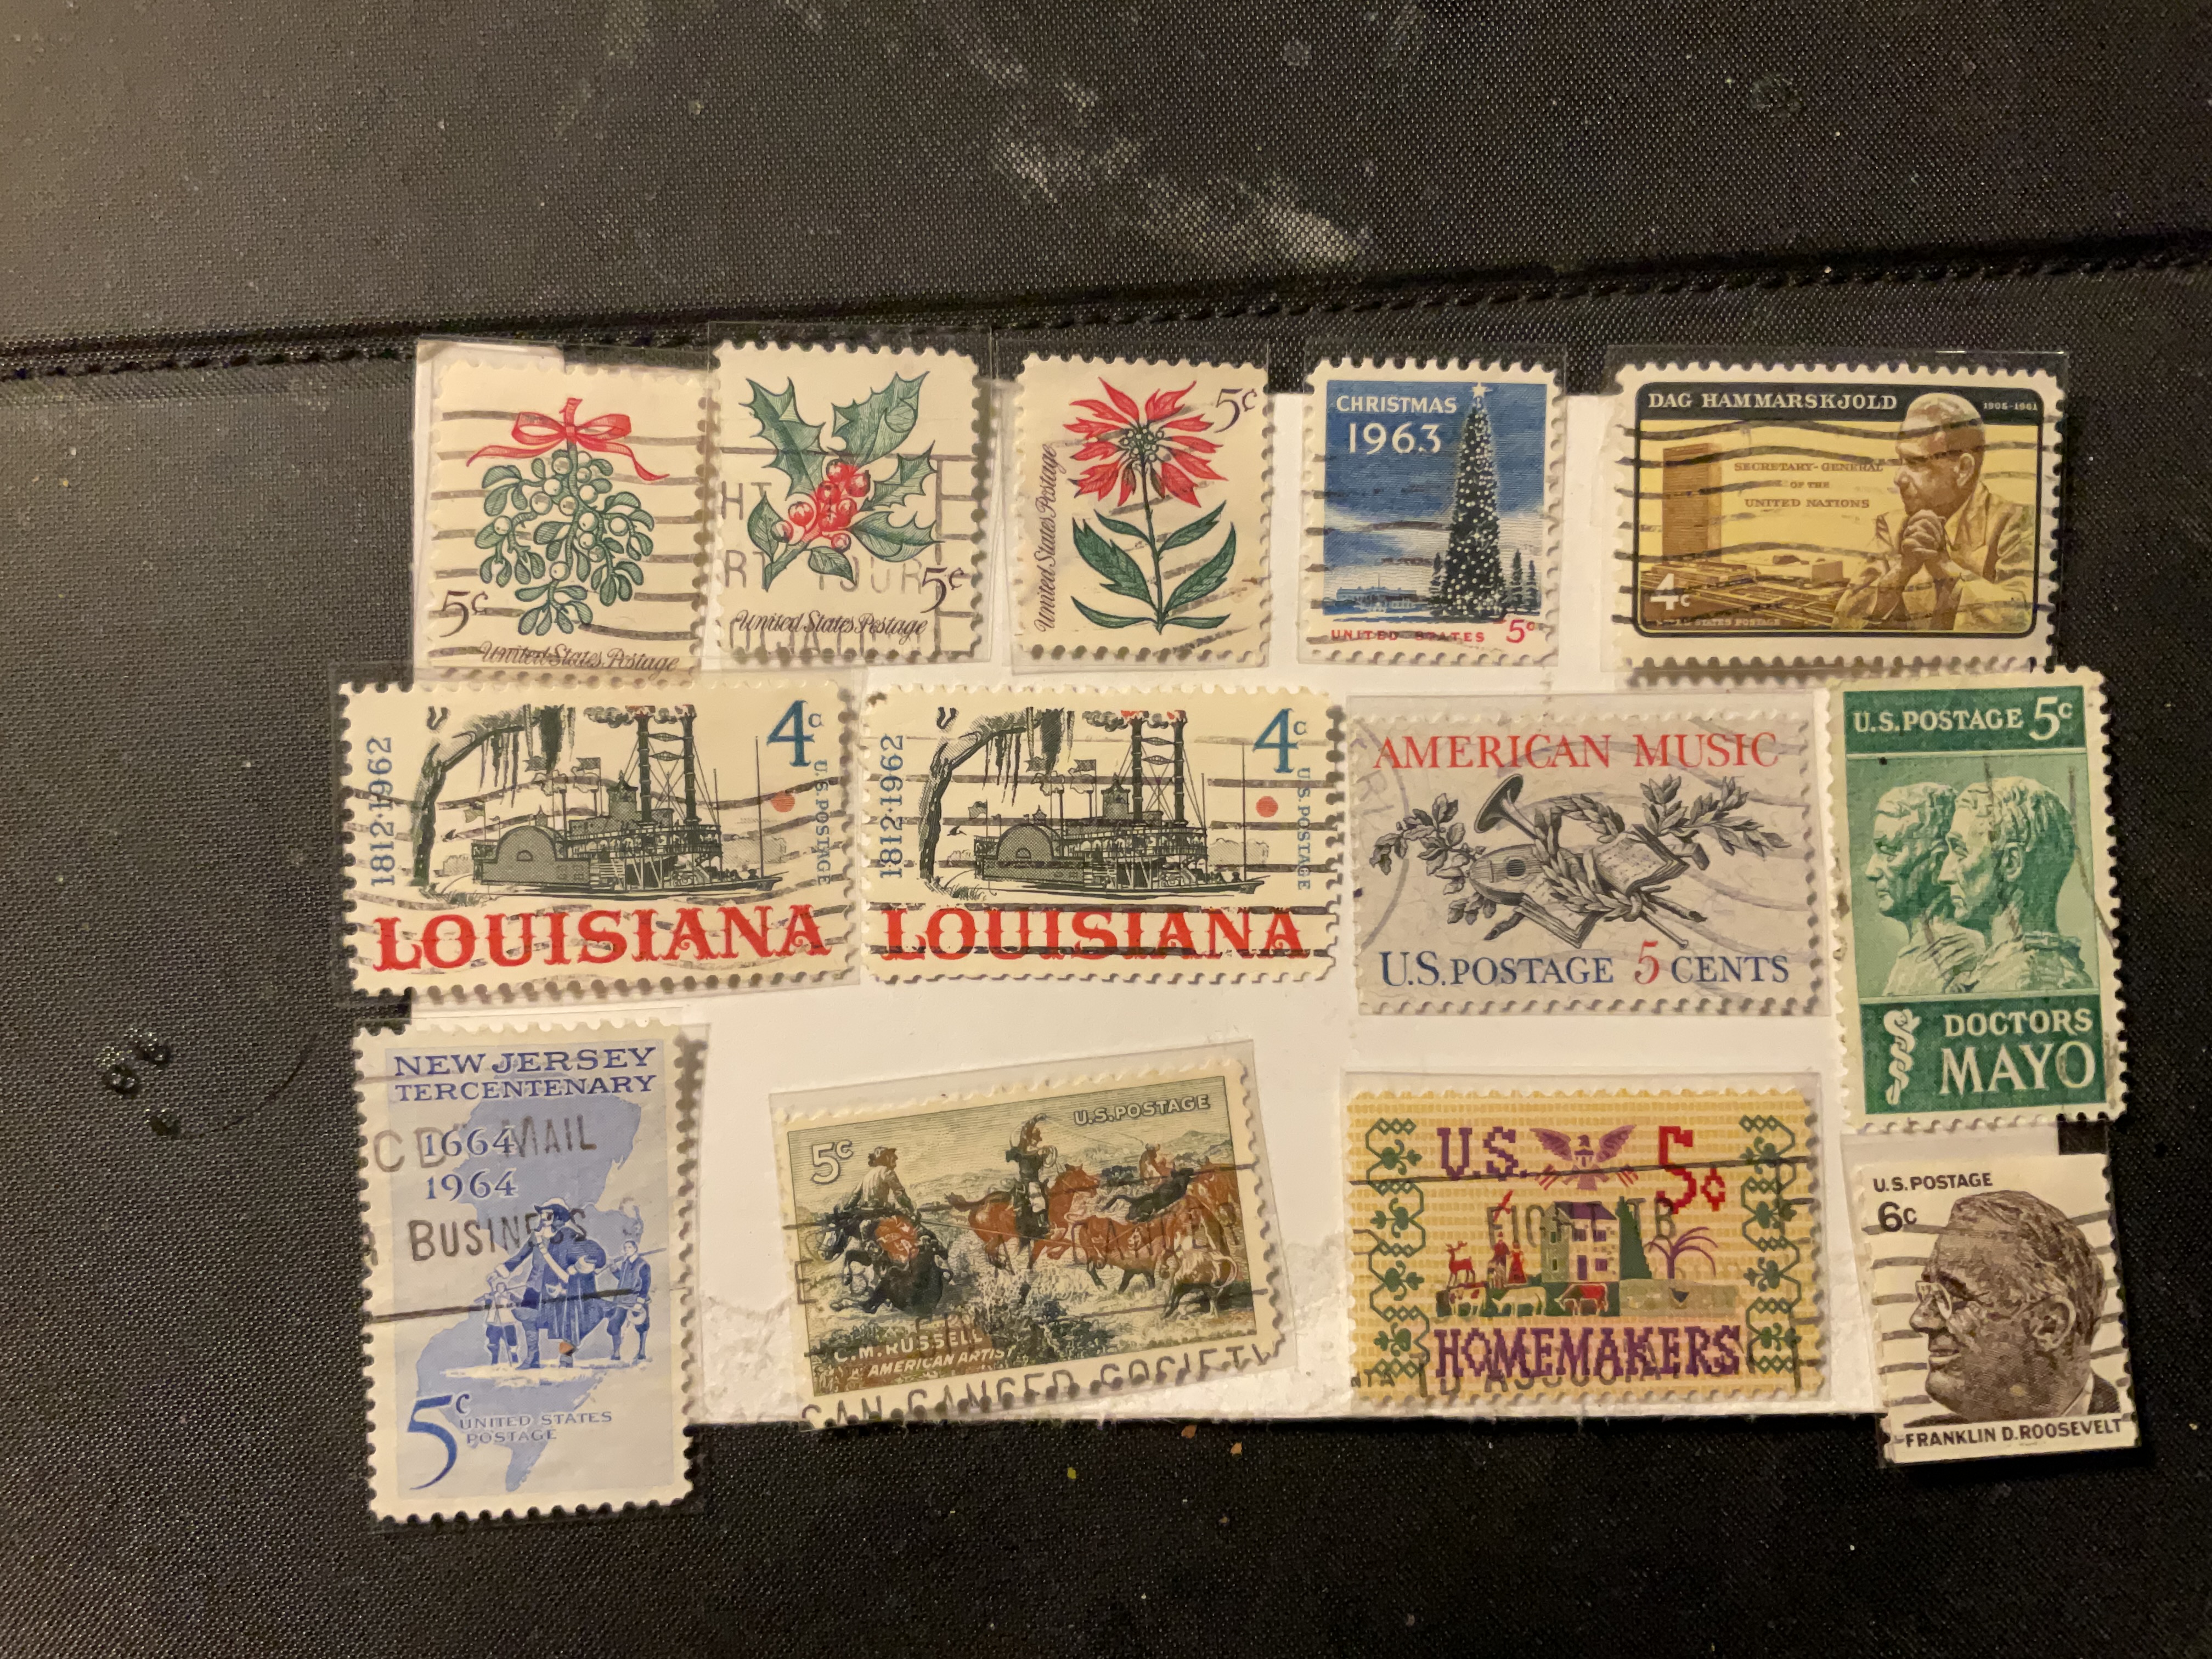 The Stamp Collecting Blog - West Coast Stamp Company